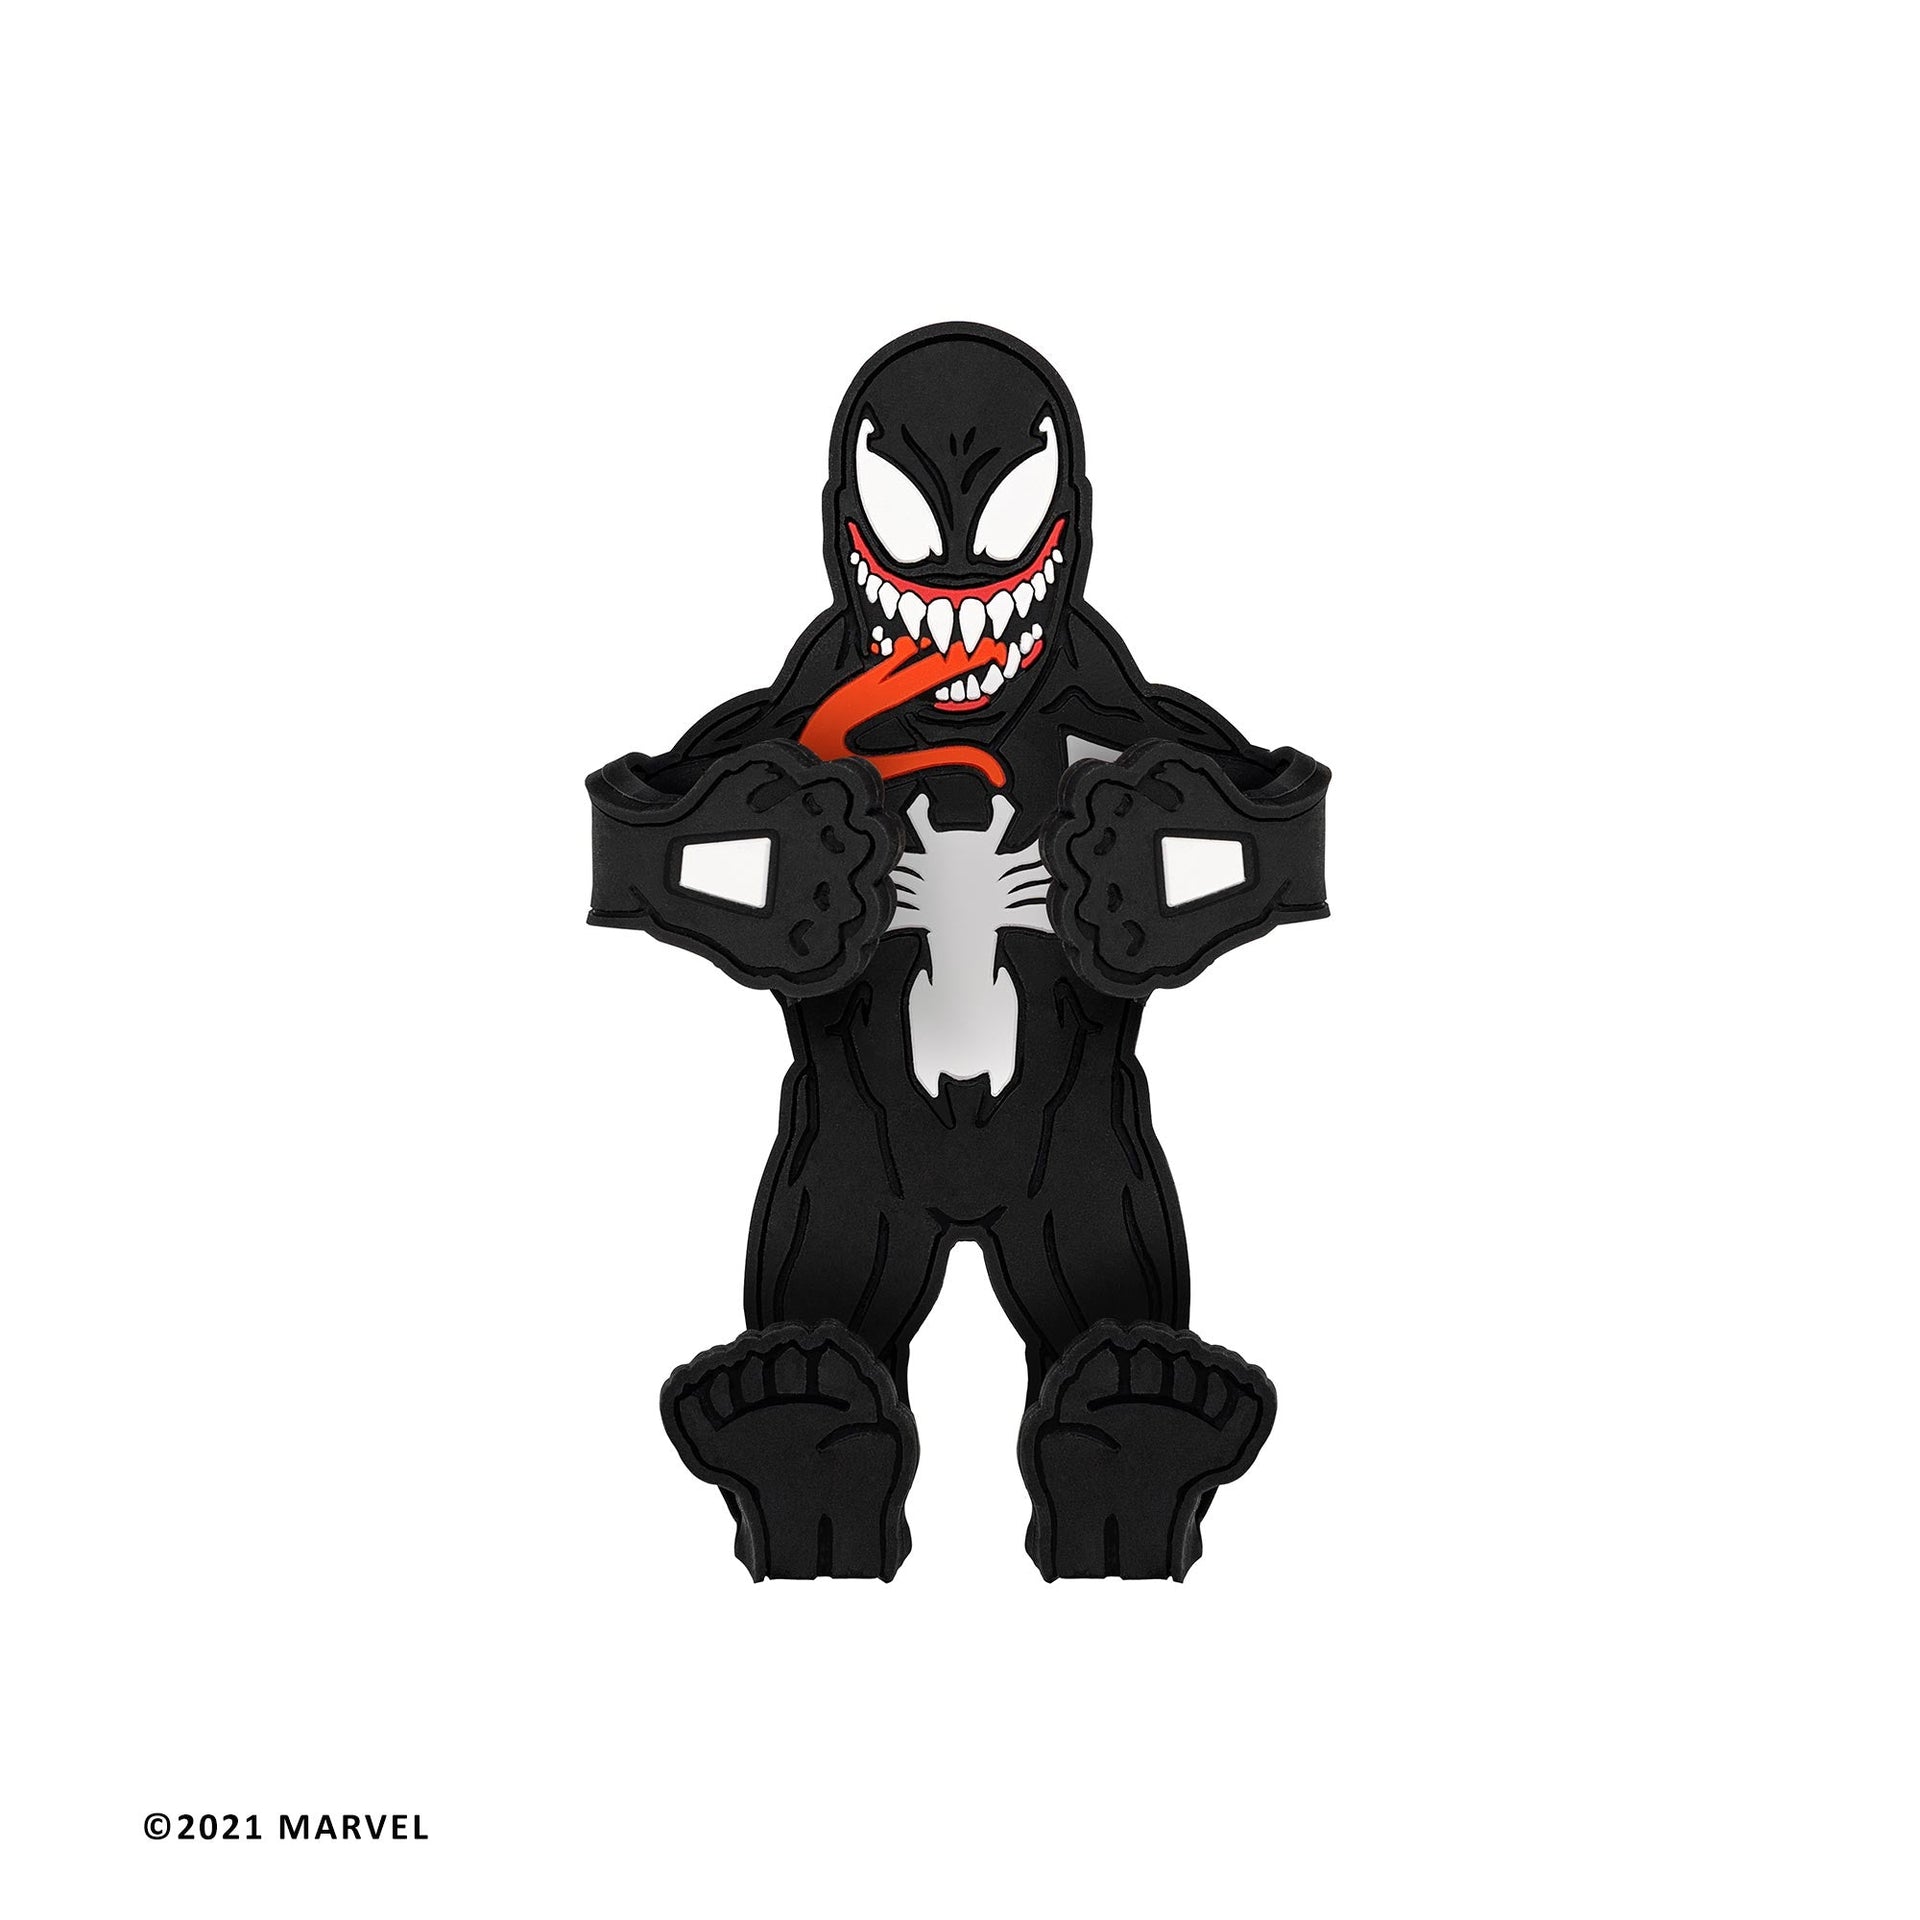 Image of Marvel Comics Venom Hug Buddy with arms and legs in the closed position, on a white background, ready to hold any phone or smart device you're willing to feed it!